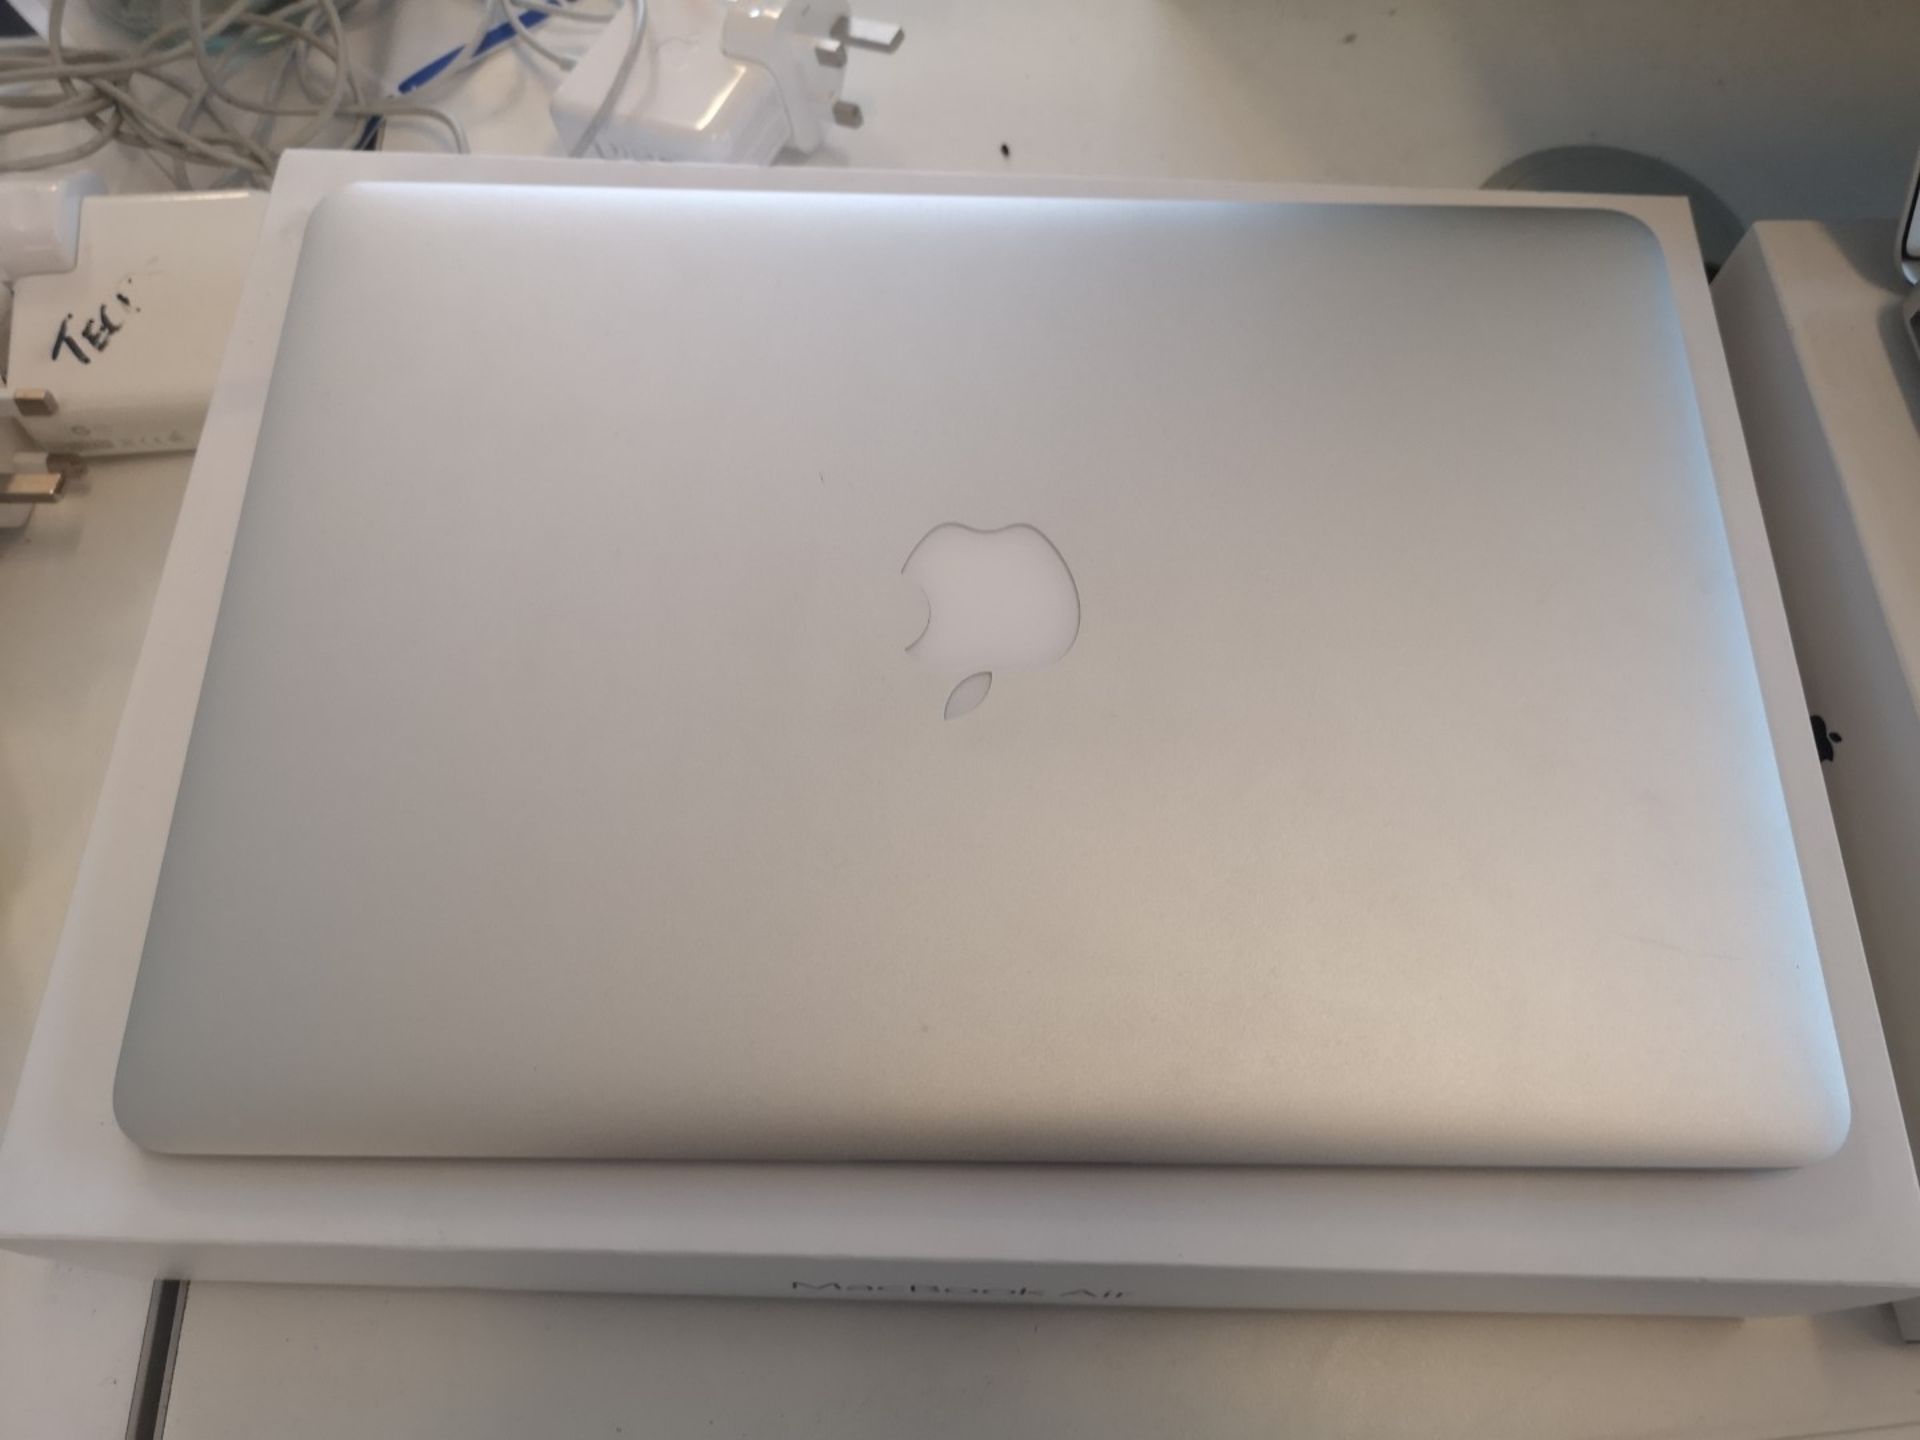 Apple MacBook Air "Core i5" 1.6 13" (Early 2015) - Image 4 of 4